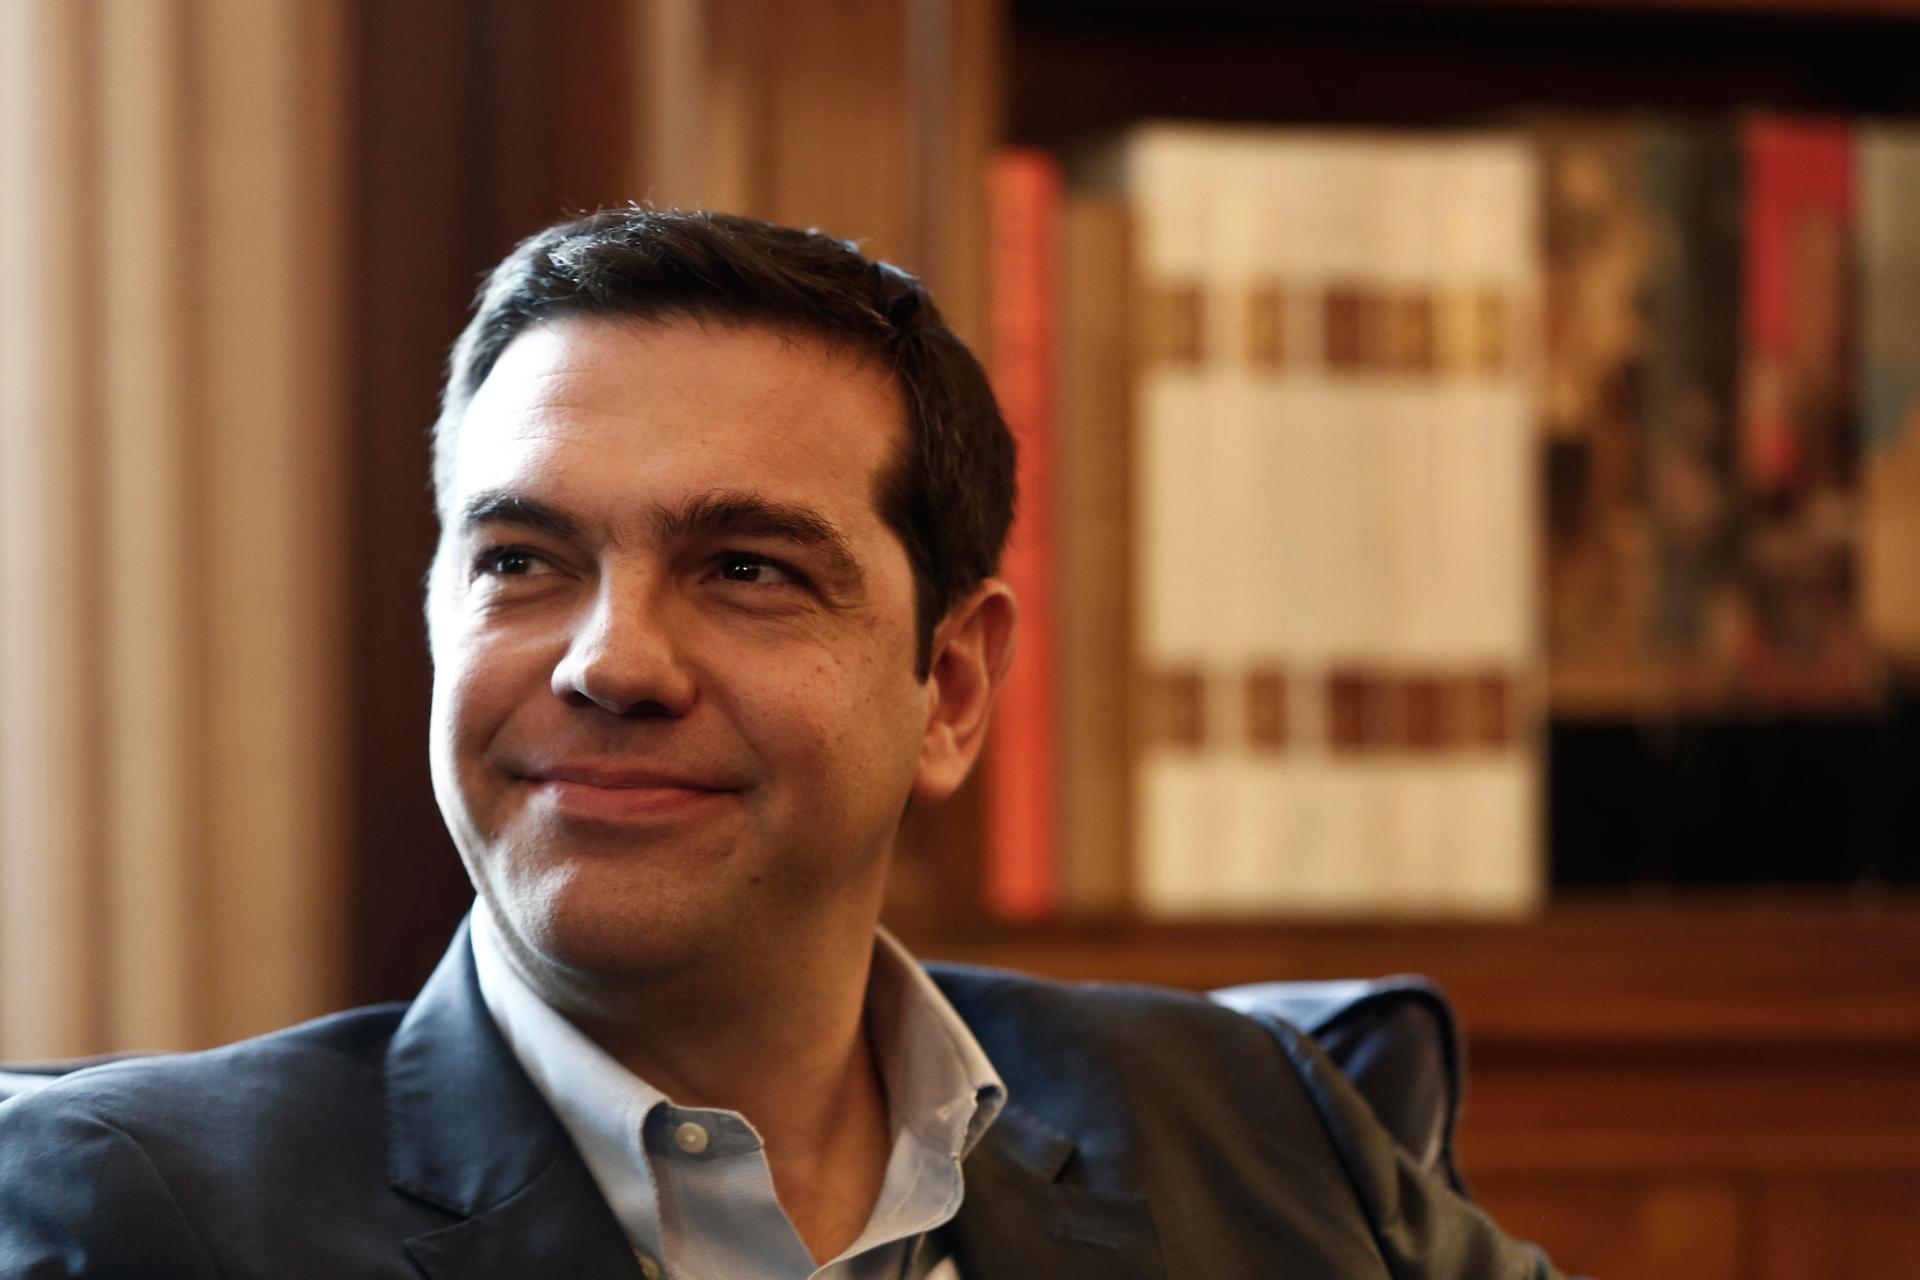 Alexis Tsipras, leader of Greece's far-left Syriza party smiles during a meeting with Greek President Karolos Papoulias (not pictured) at the Presidential palace in Athens November 3, 2014. 